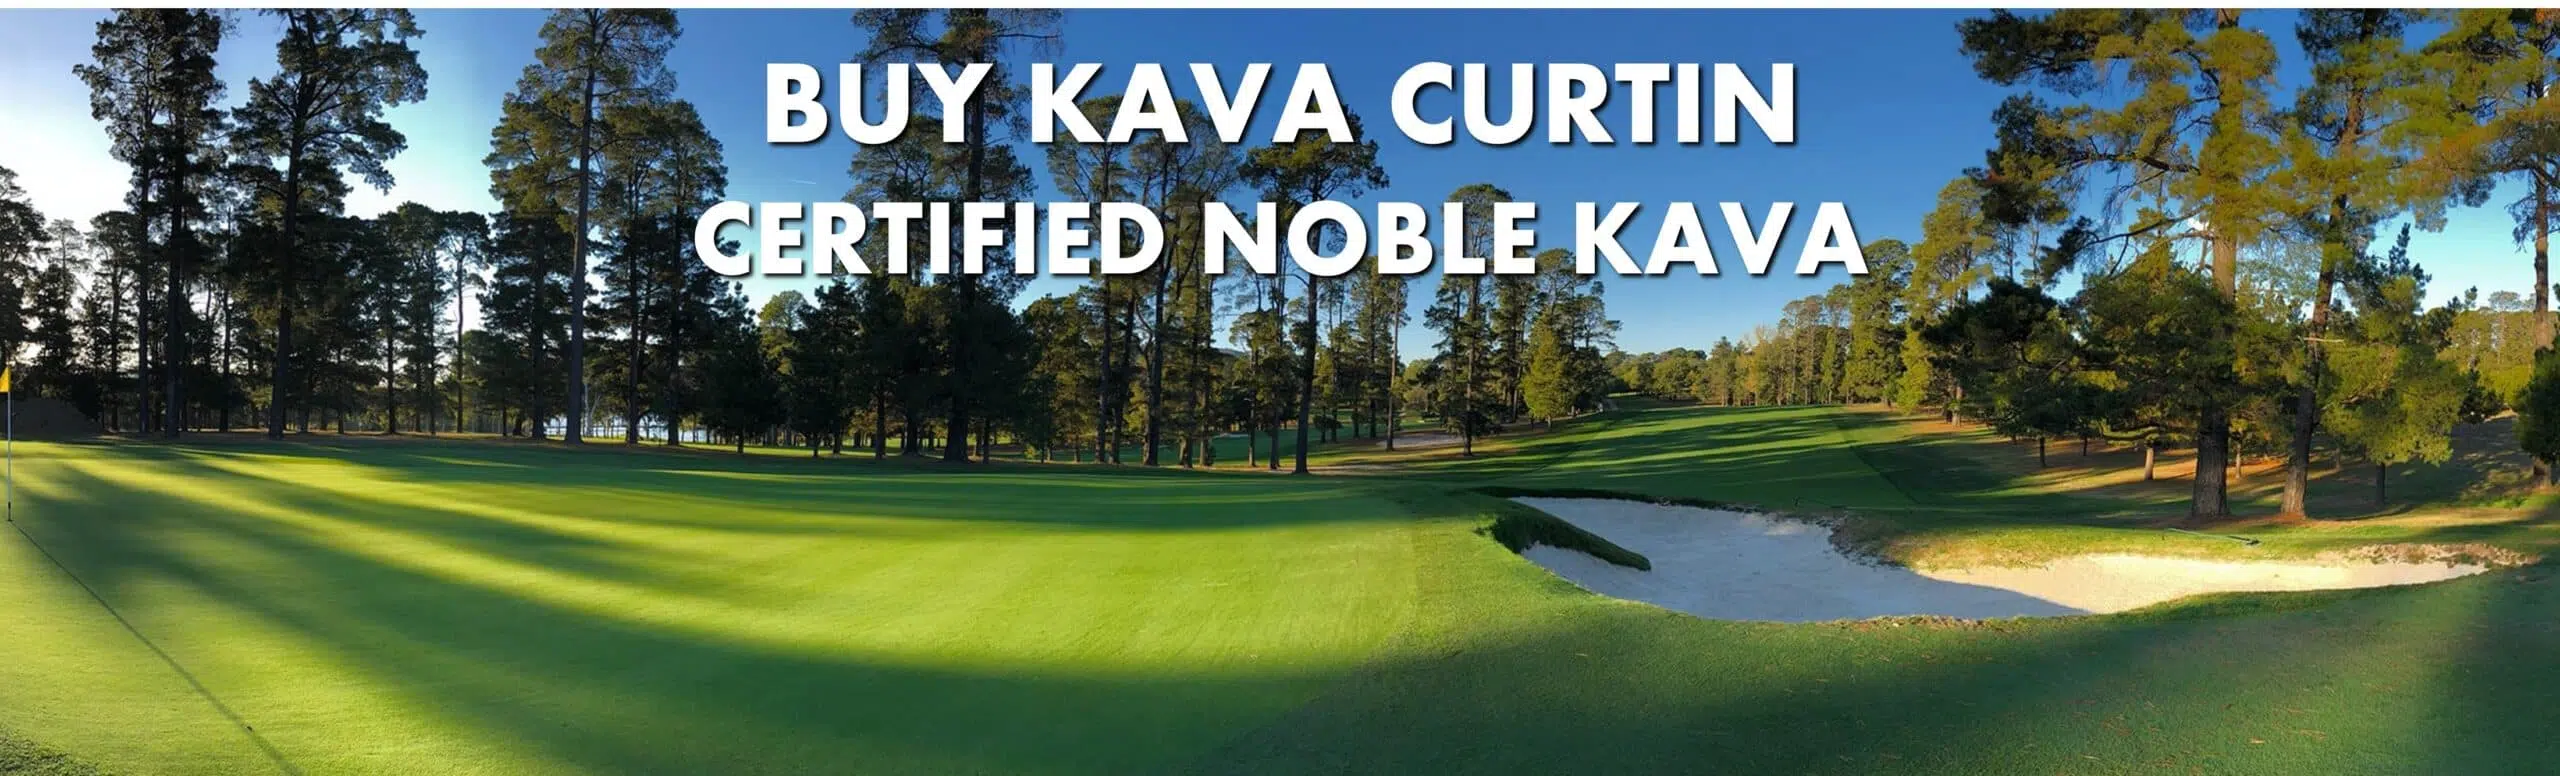 Royal Canberra Golf Club adjacent to Curtin, ACT with caption Buy Kava Curtin Certified Noble Kava